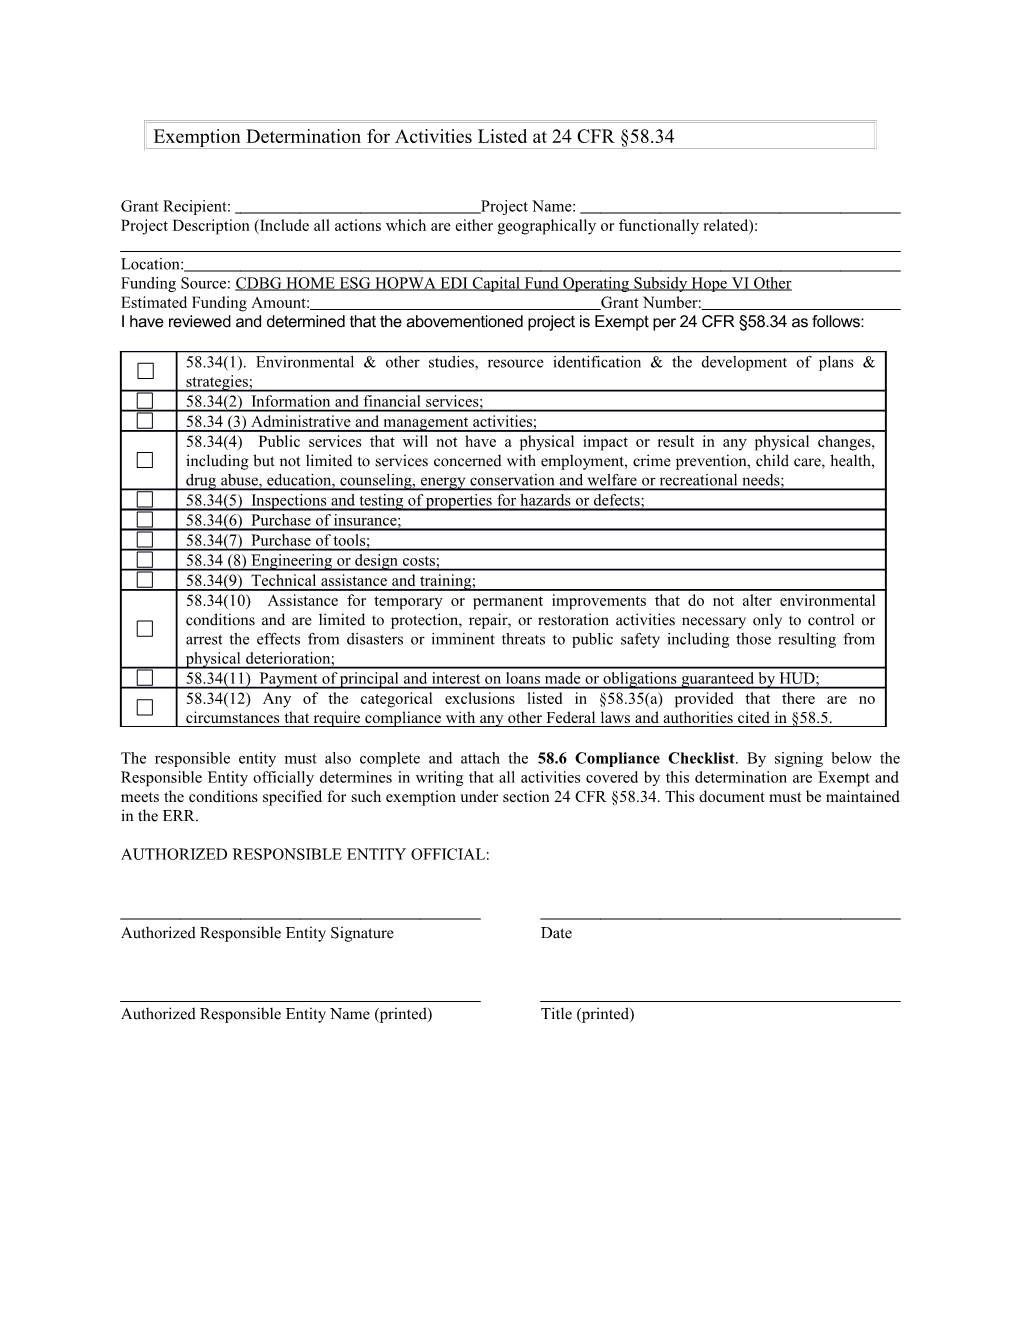 Exemption Determination for Activities Listed at 24 CFR 58.34